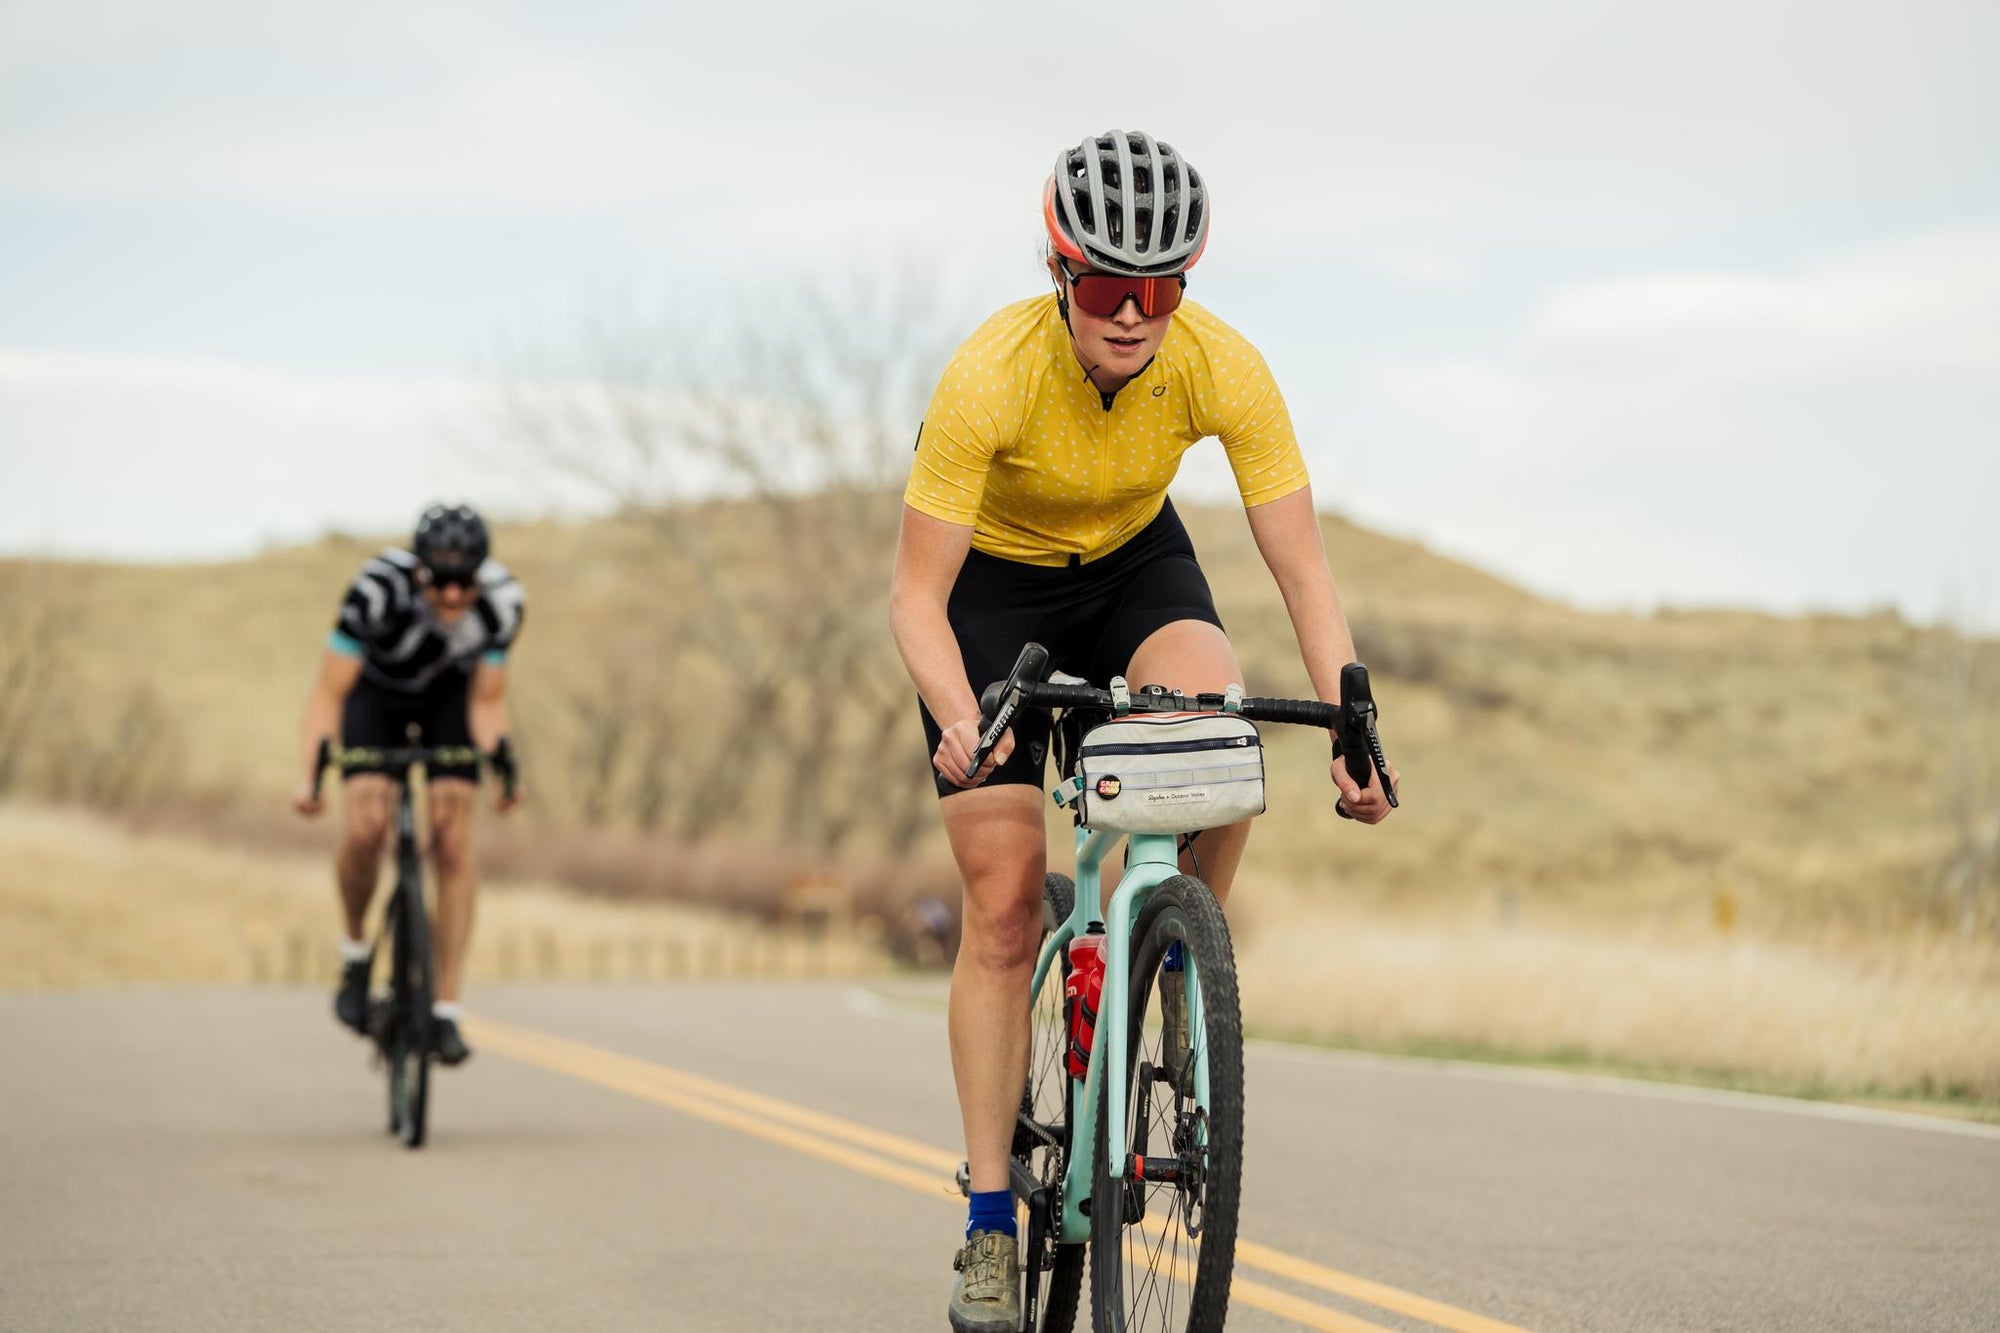 7 Tips For Proper Cycling Etiquette & Safety